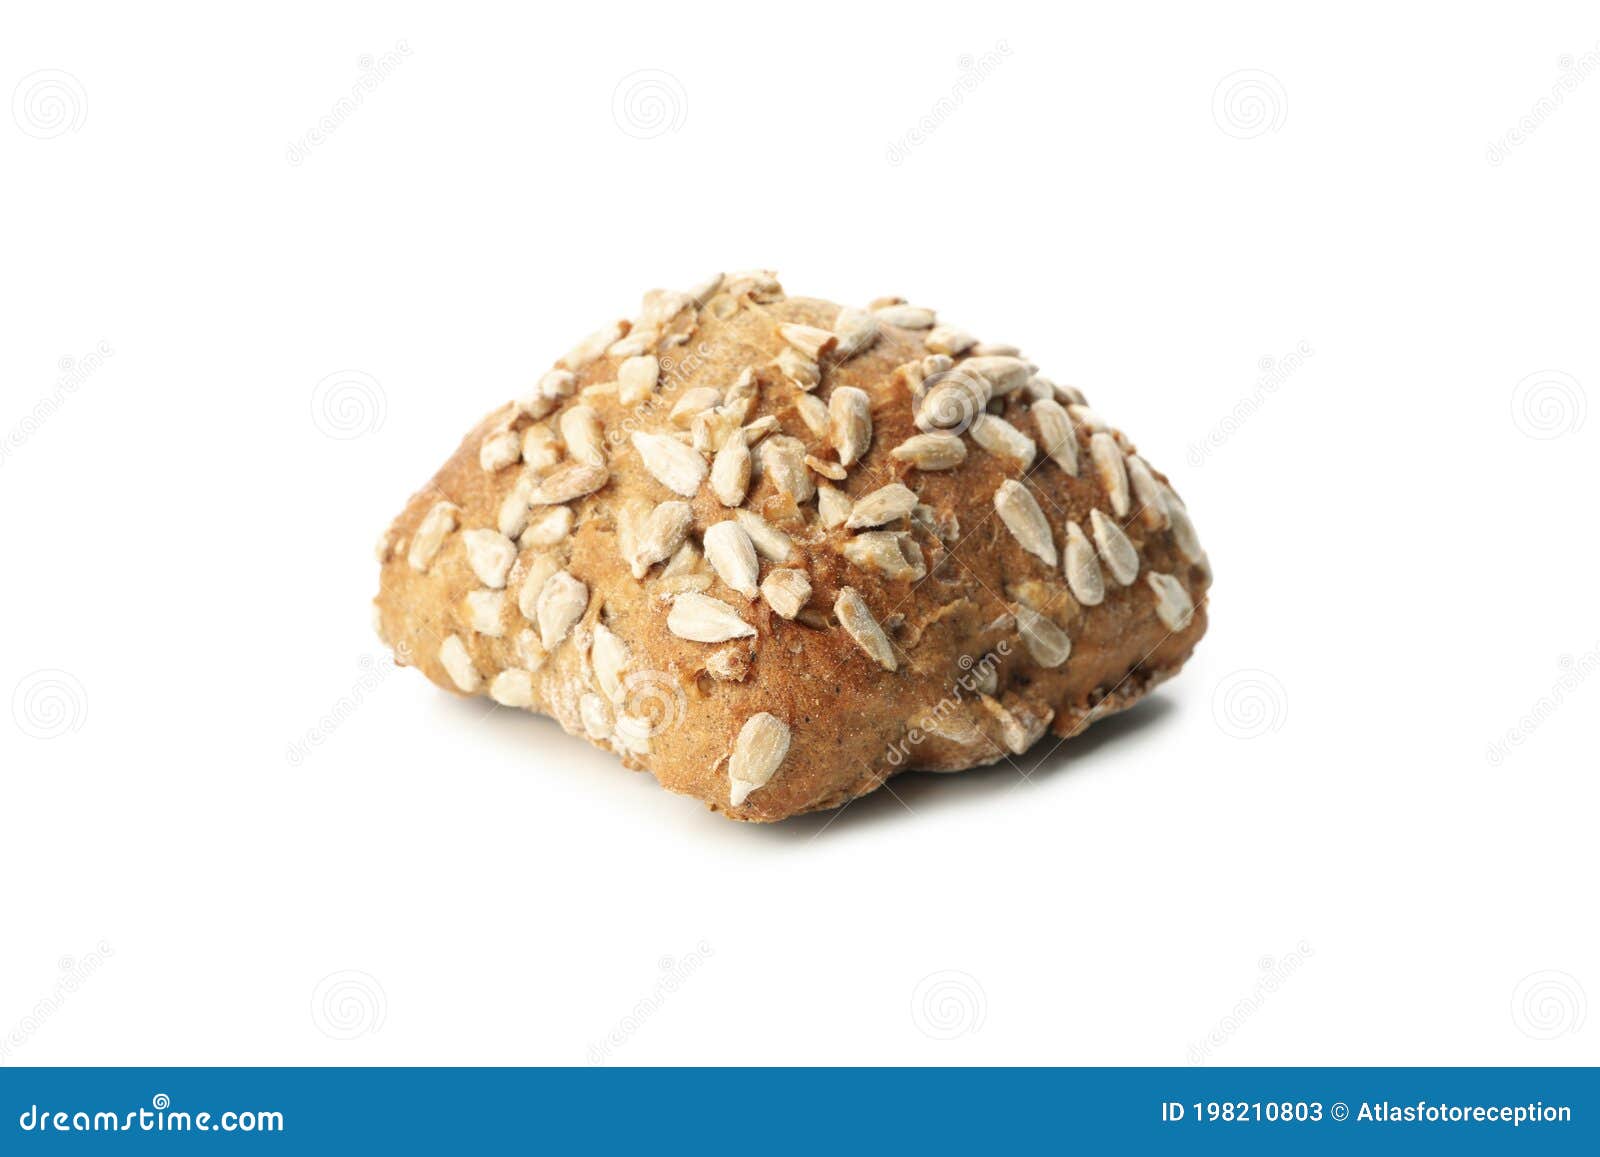 Bun with Sunflower Seeds Isolated on White Background Stock Image ...